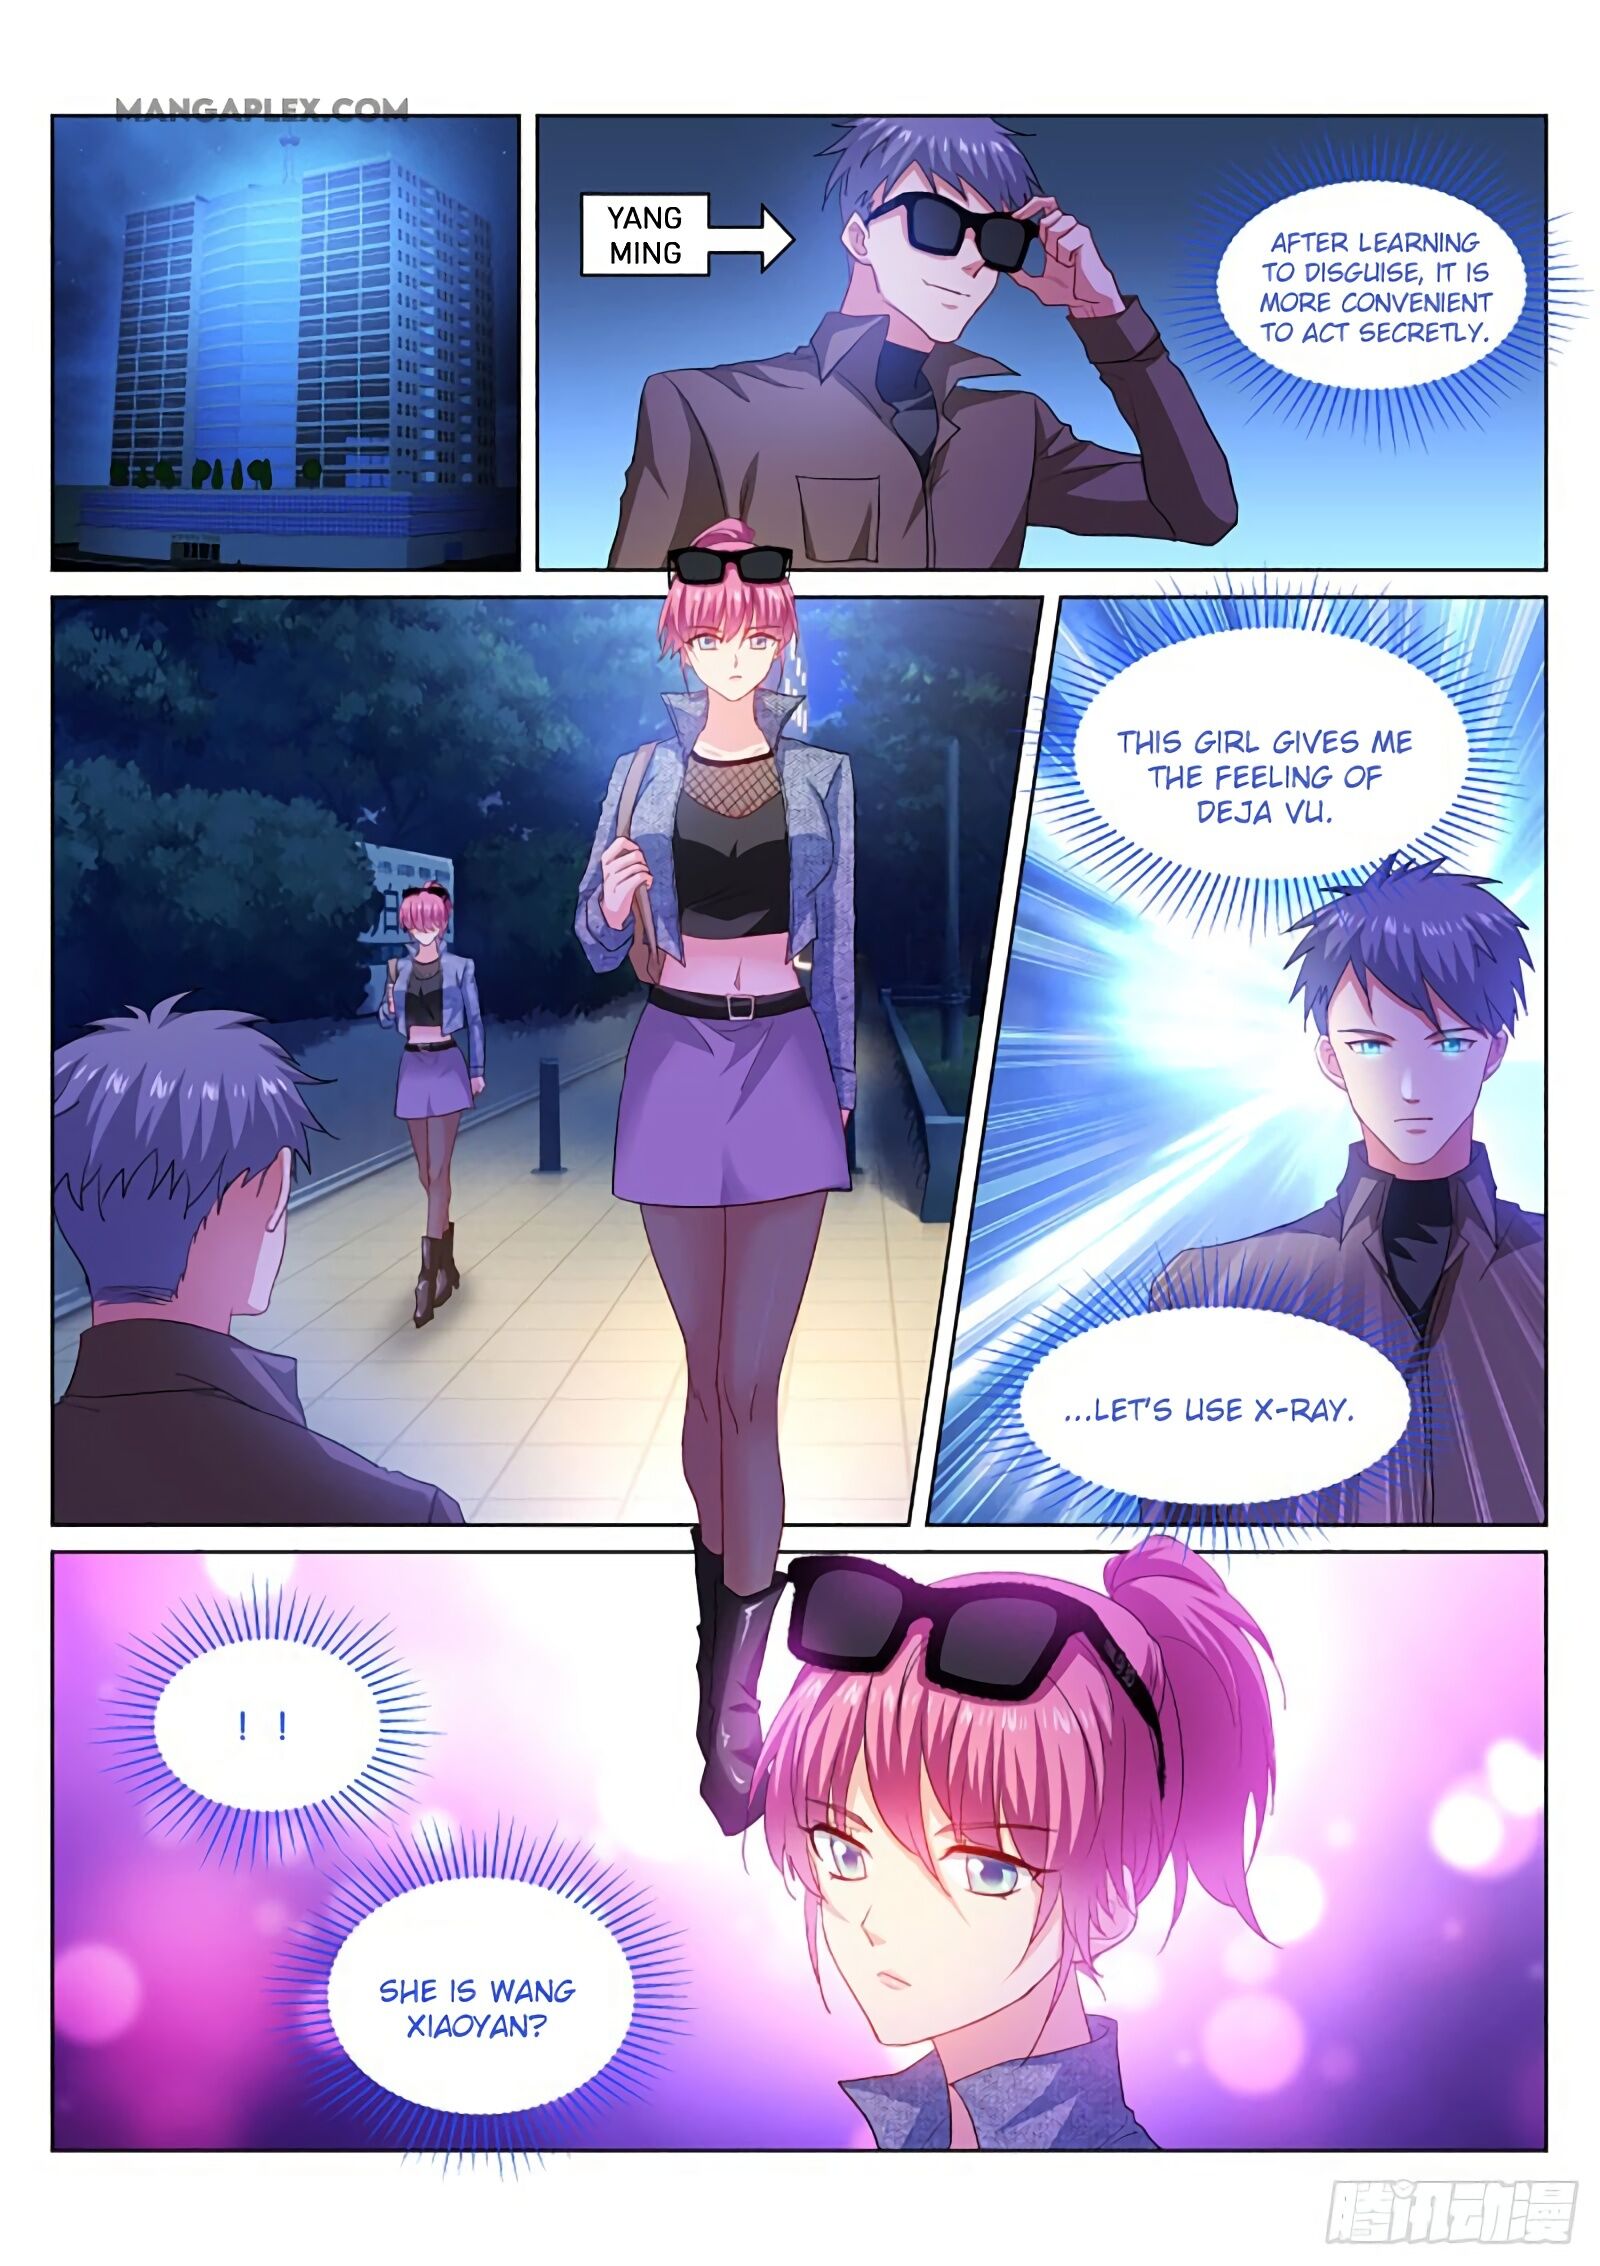 So Pure, So Flirtatious ( Very Pure ) - Page 2